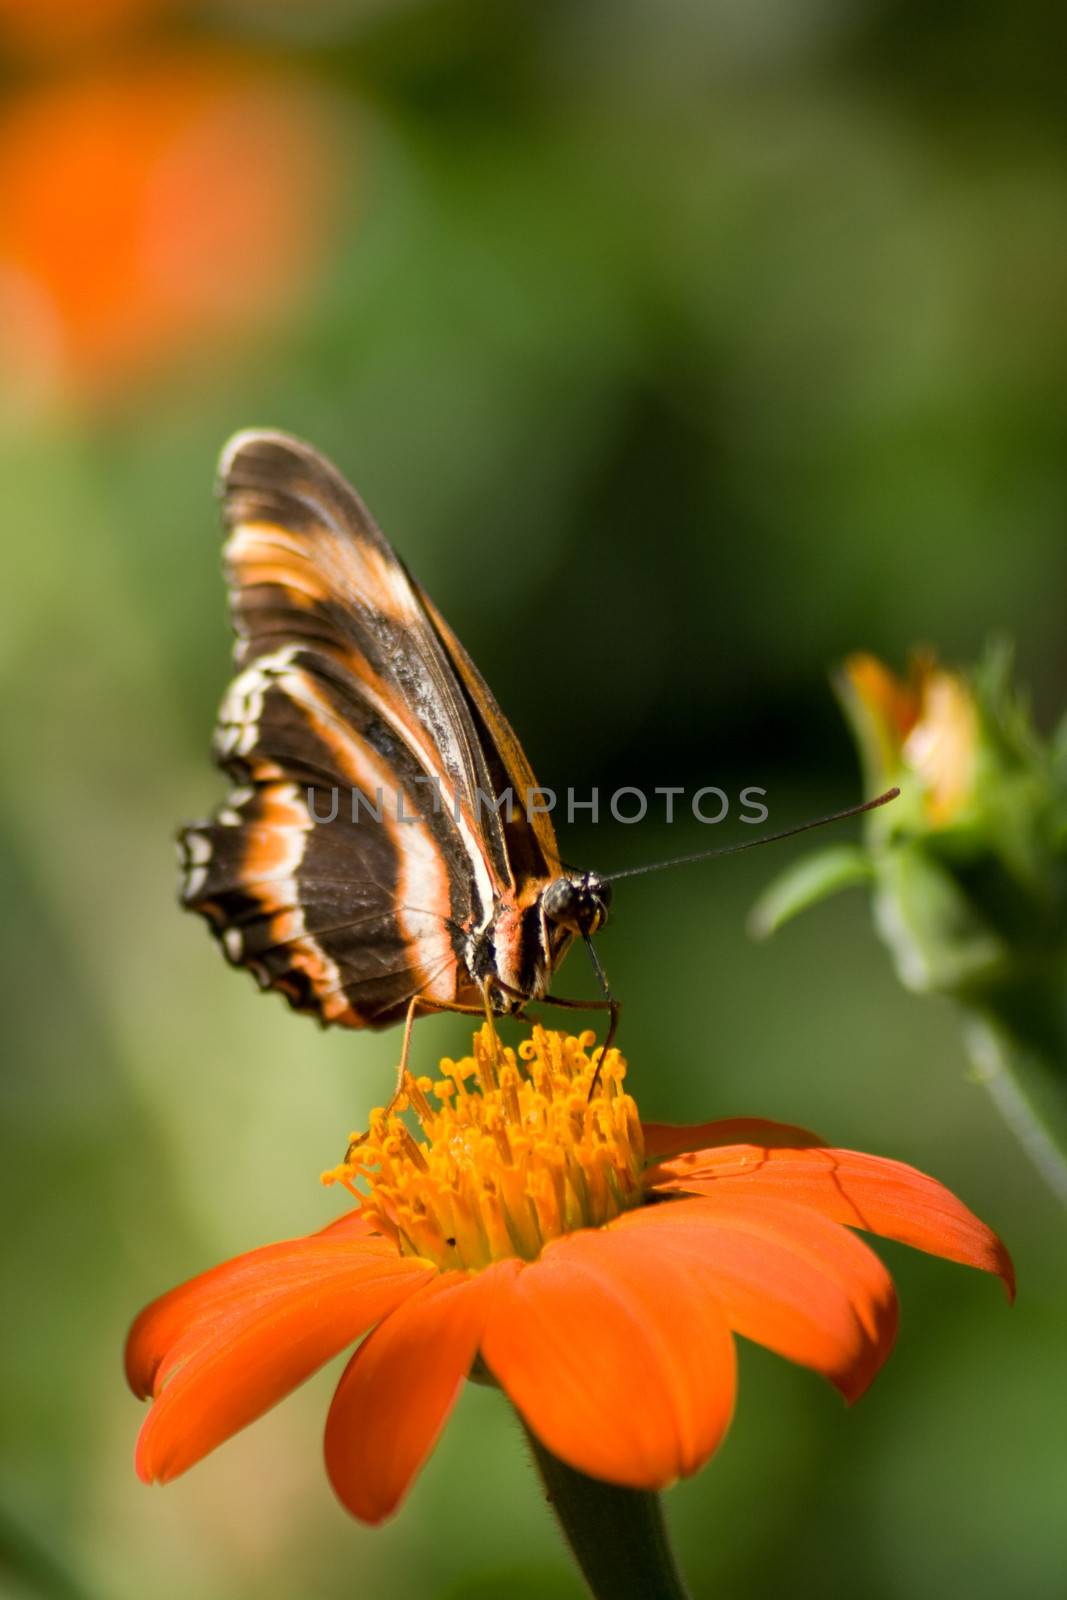 A black and orange butterfly rests with folded wings on a tithonia flower.